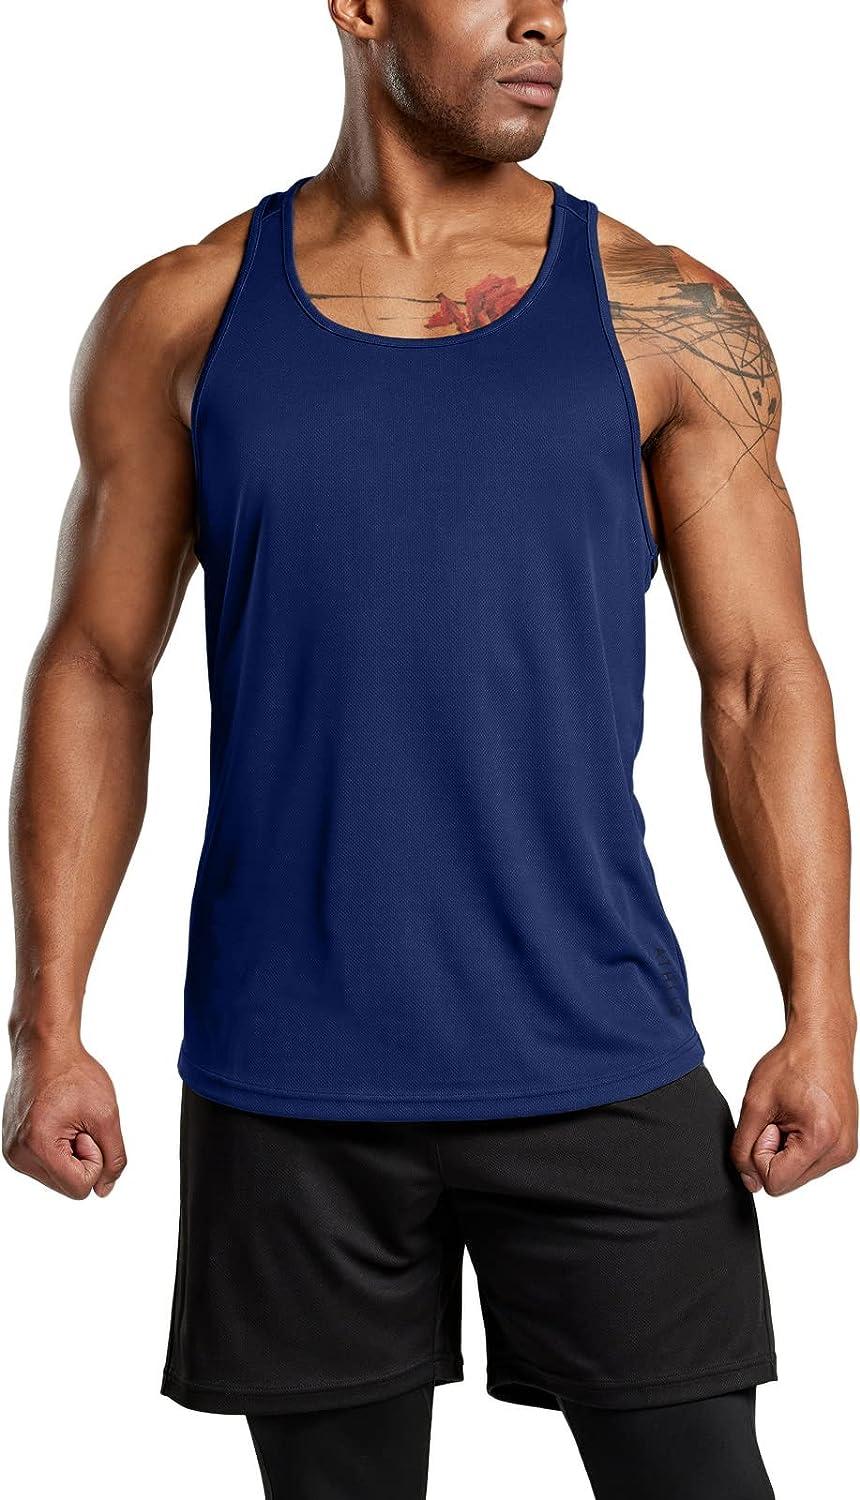 Men's Workout Shirts & Tops in Blue